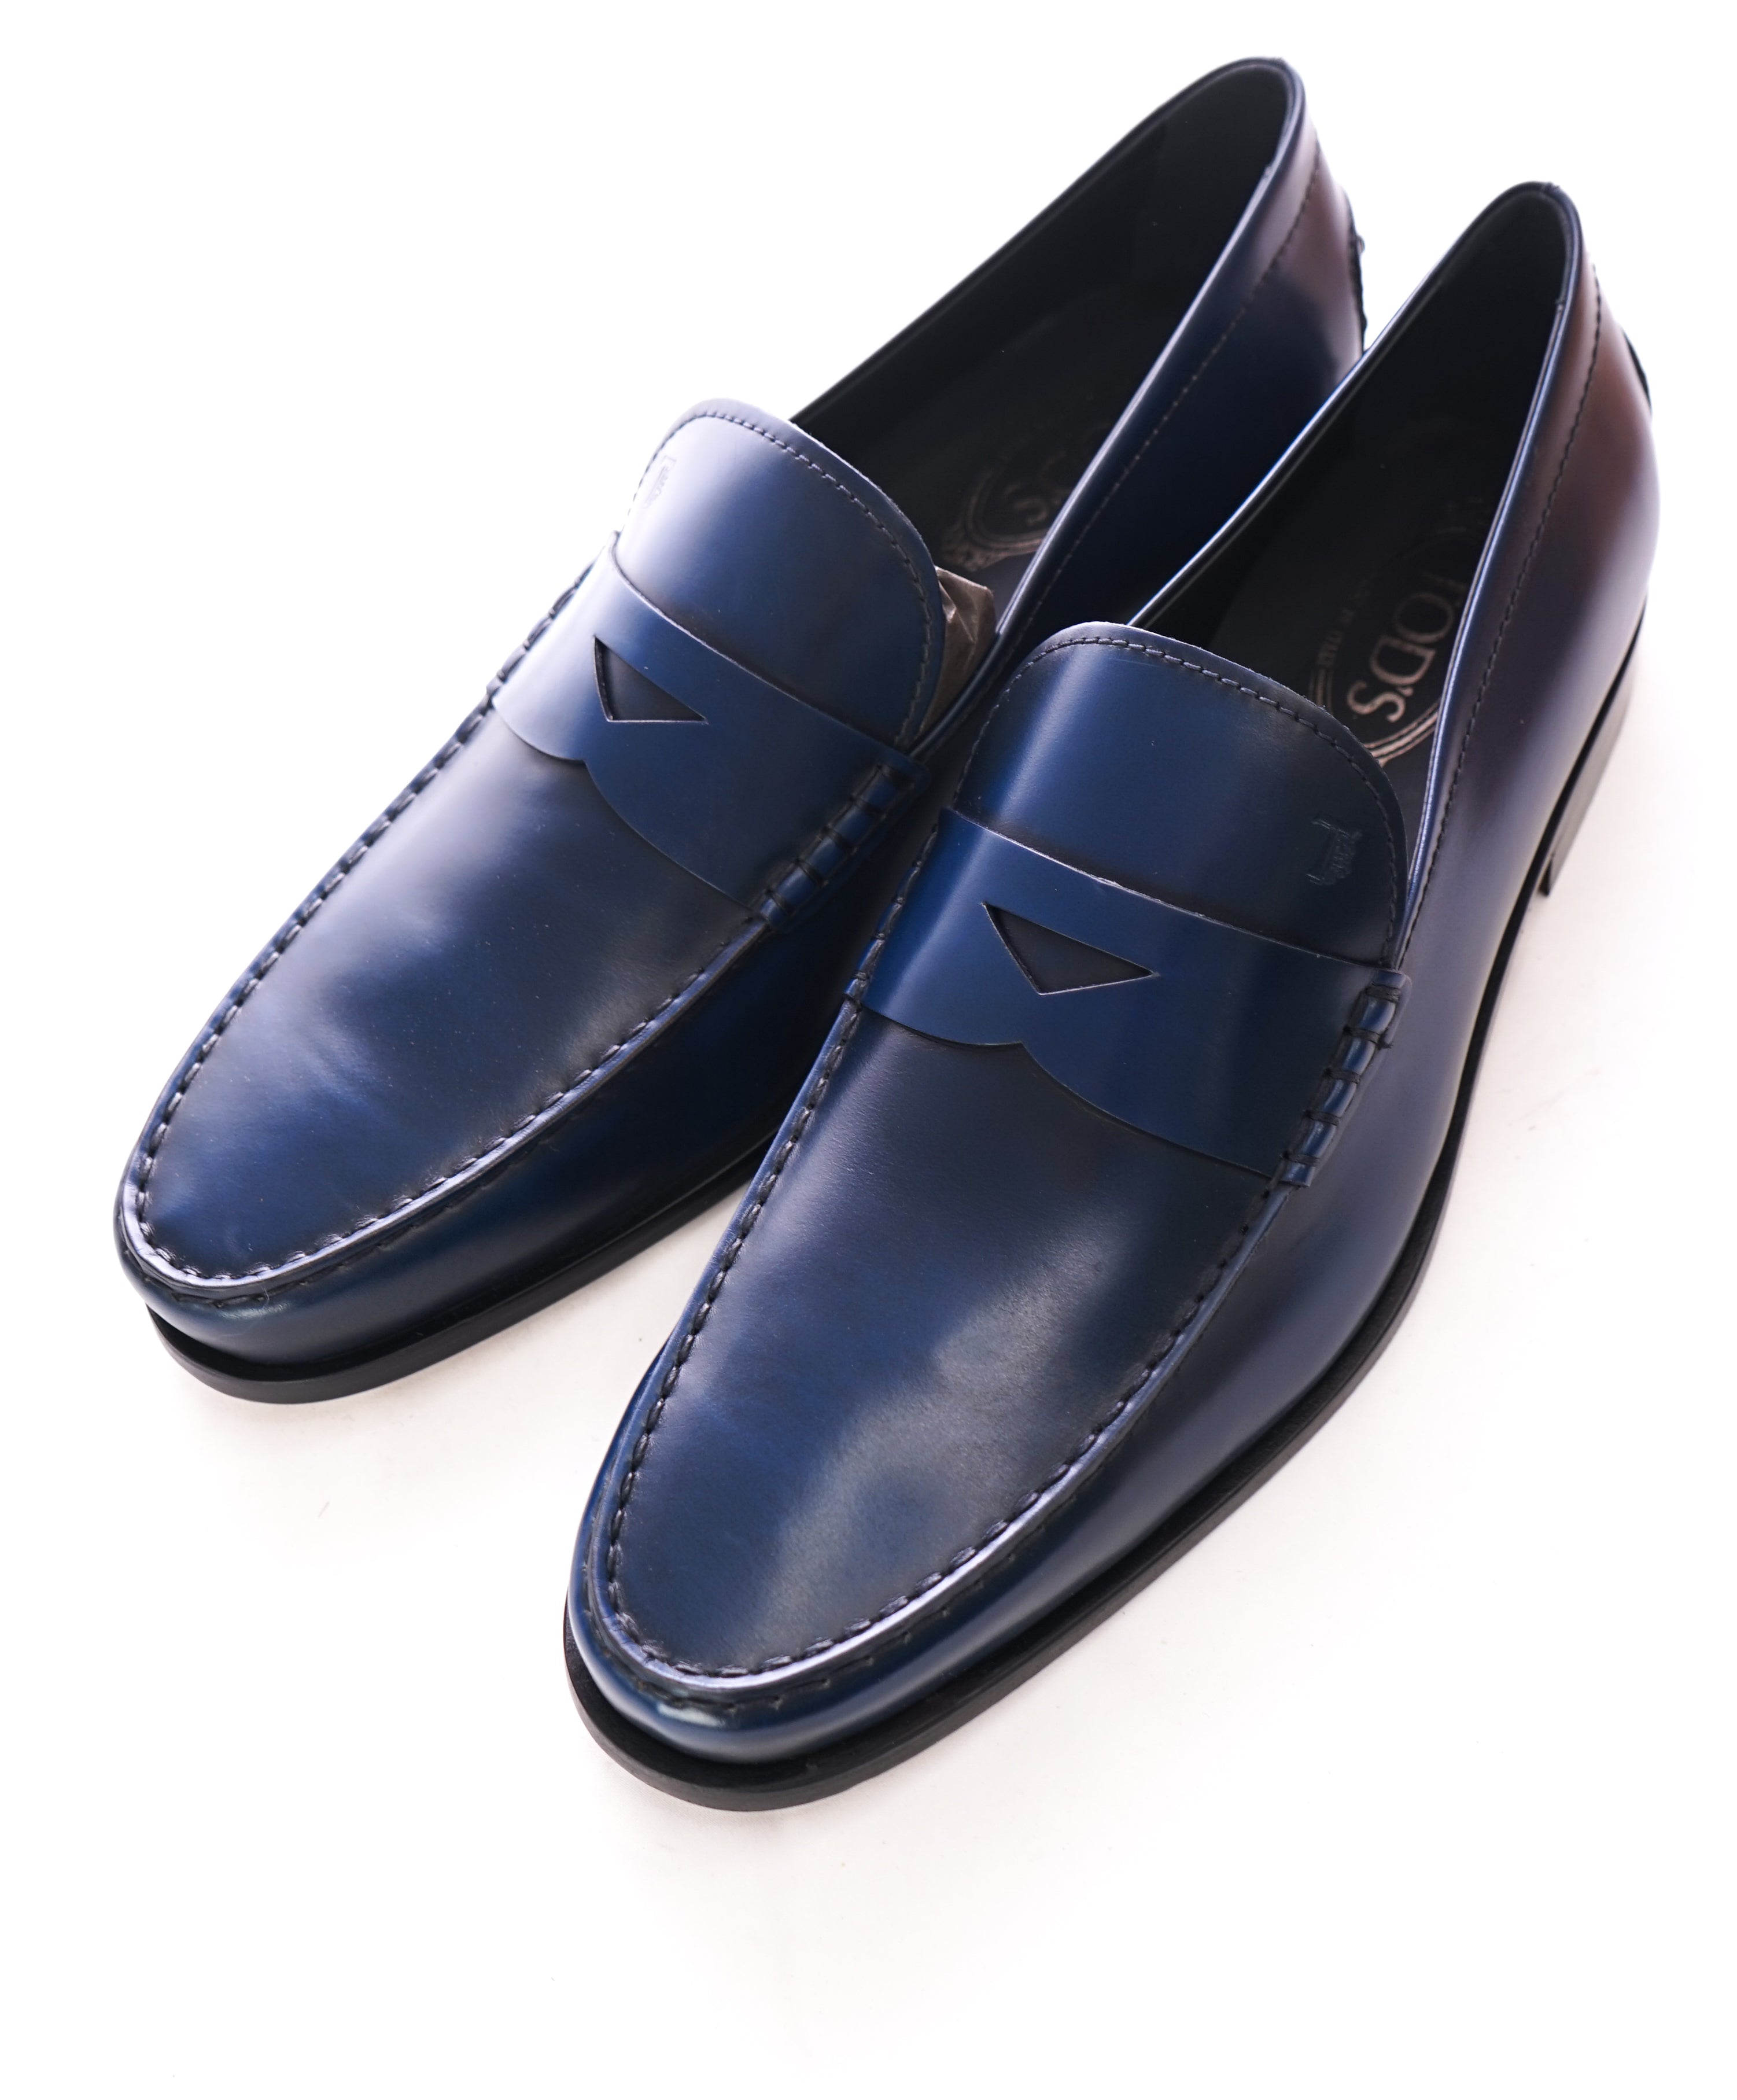 TOD’S - Blue Leather Penny Loafers “Boston Devon” Leather Sole - 12US ...